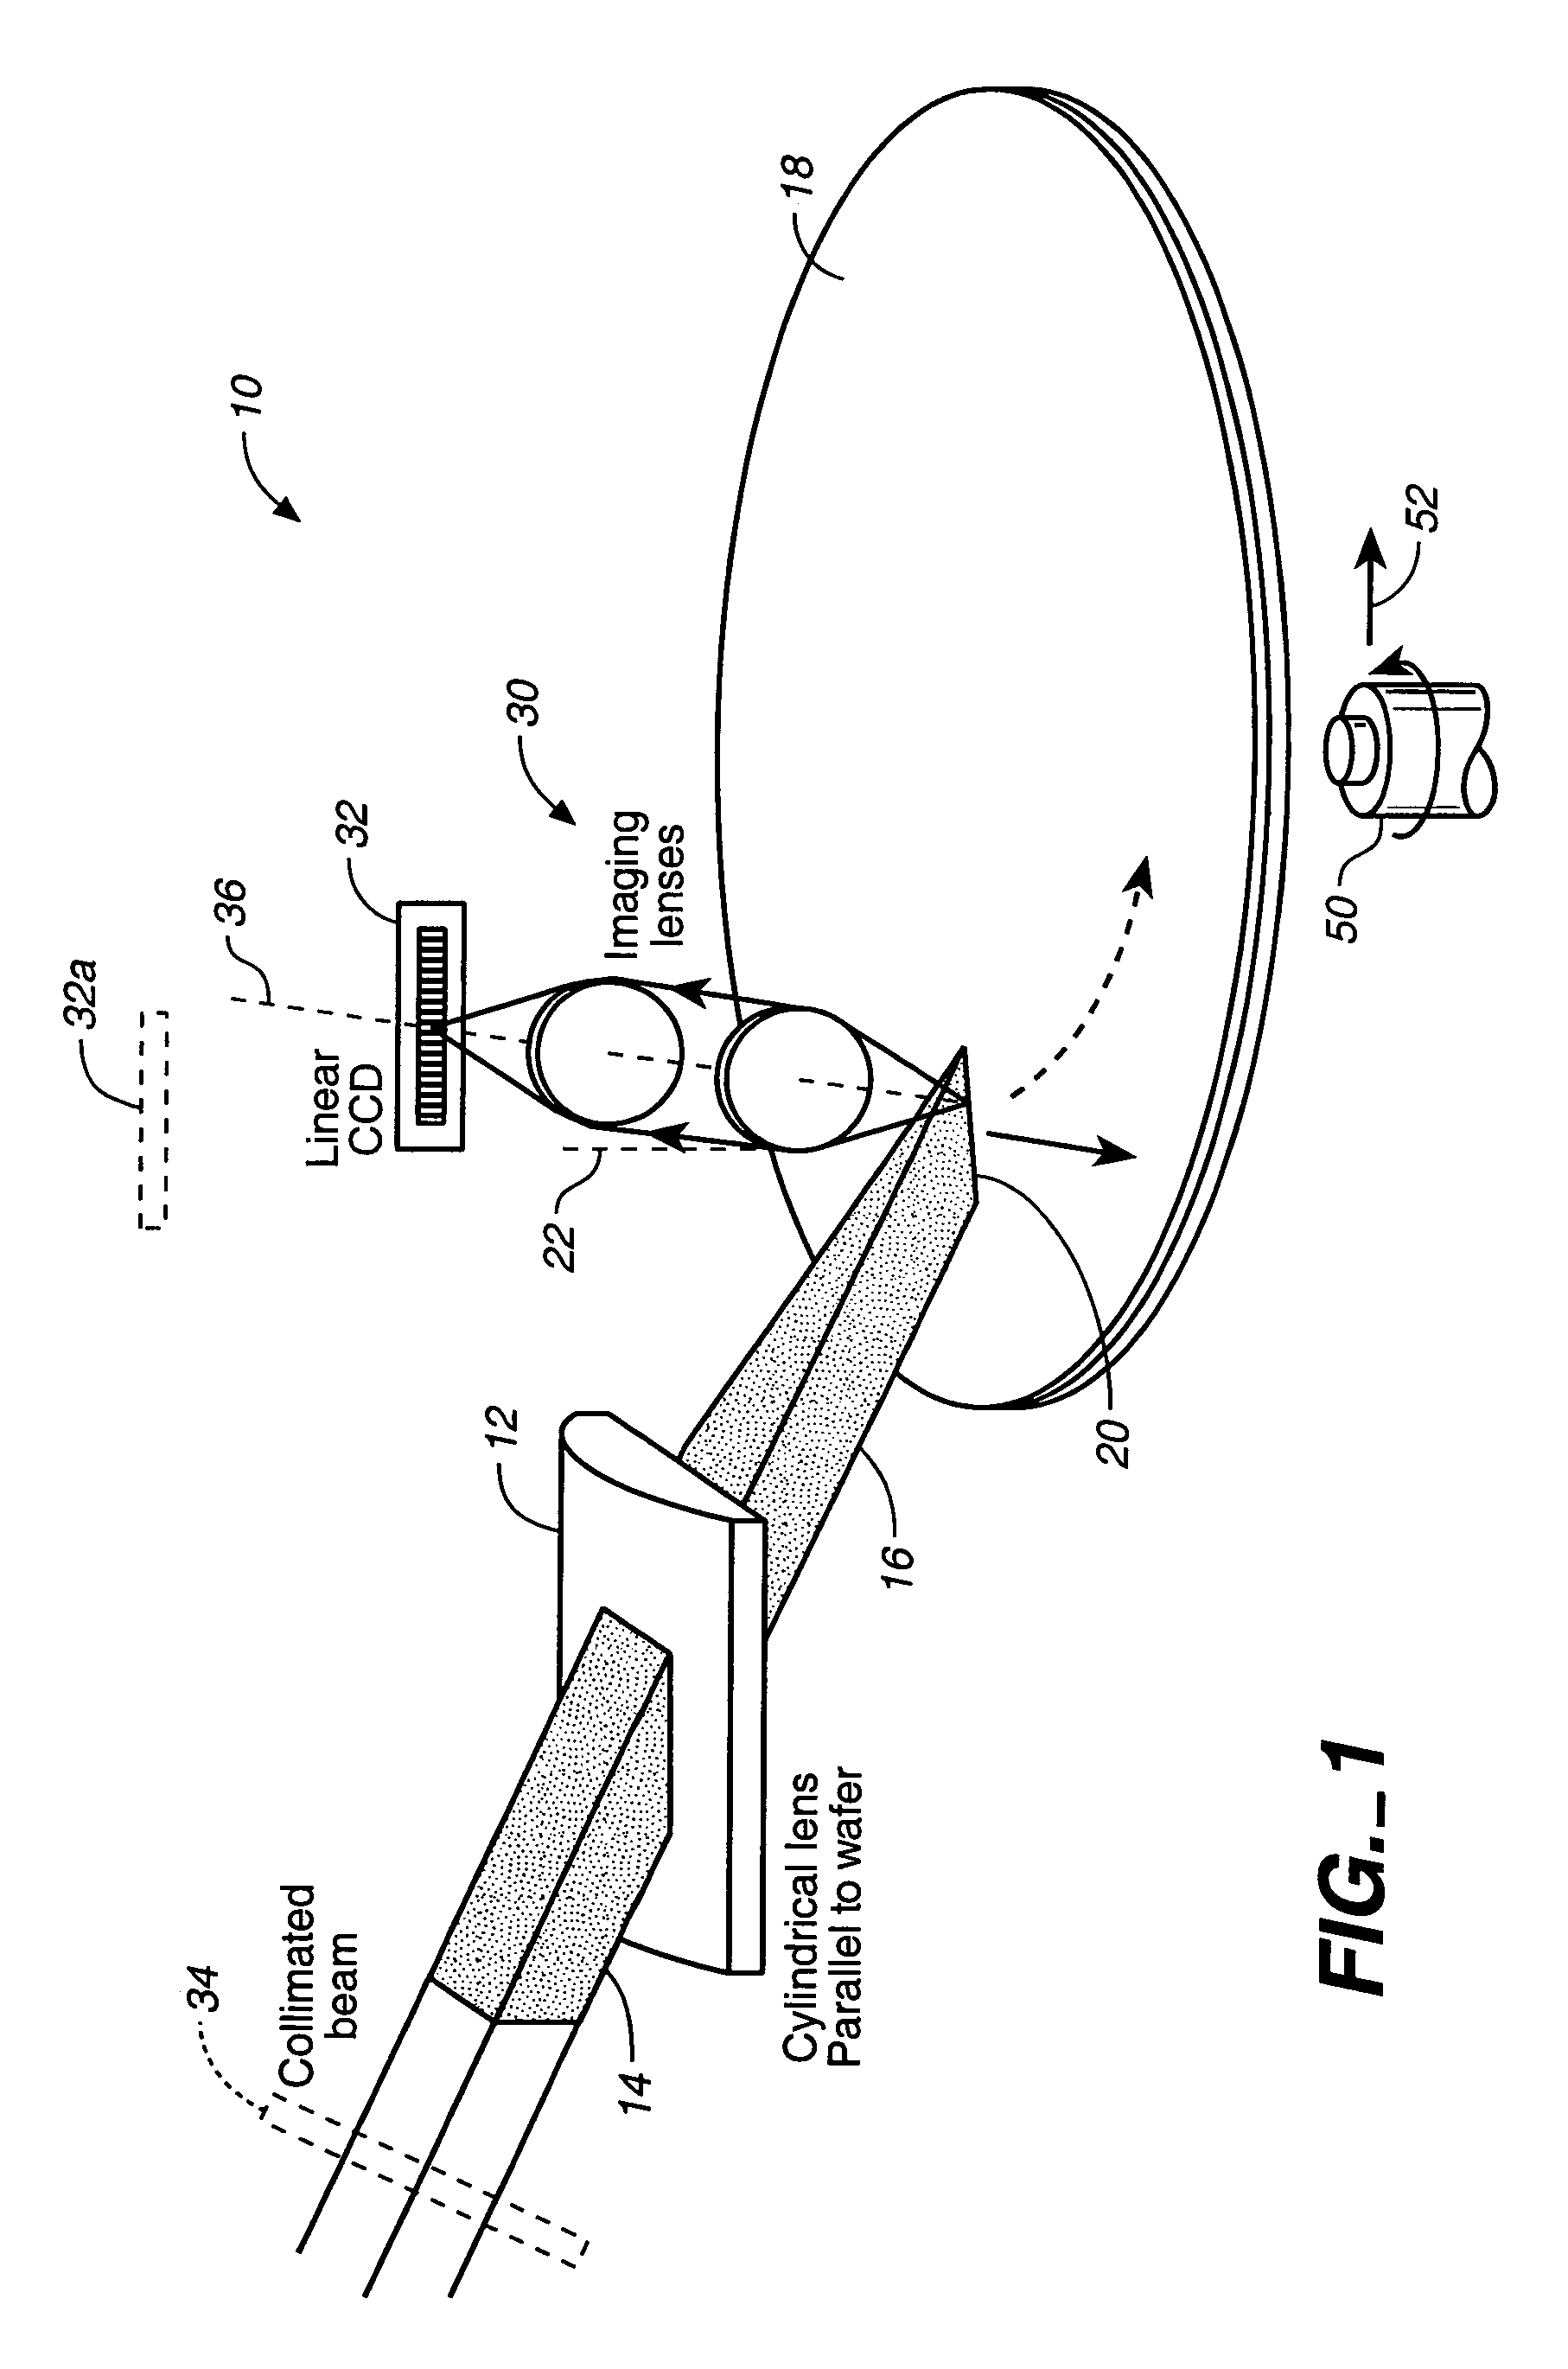 System for detecting anomalies and/or features of a surface